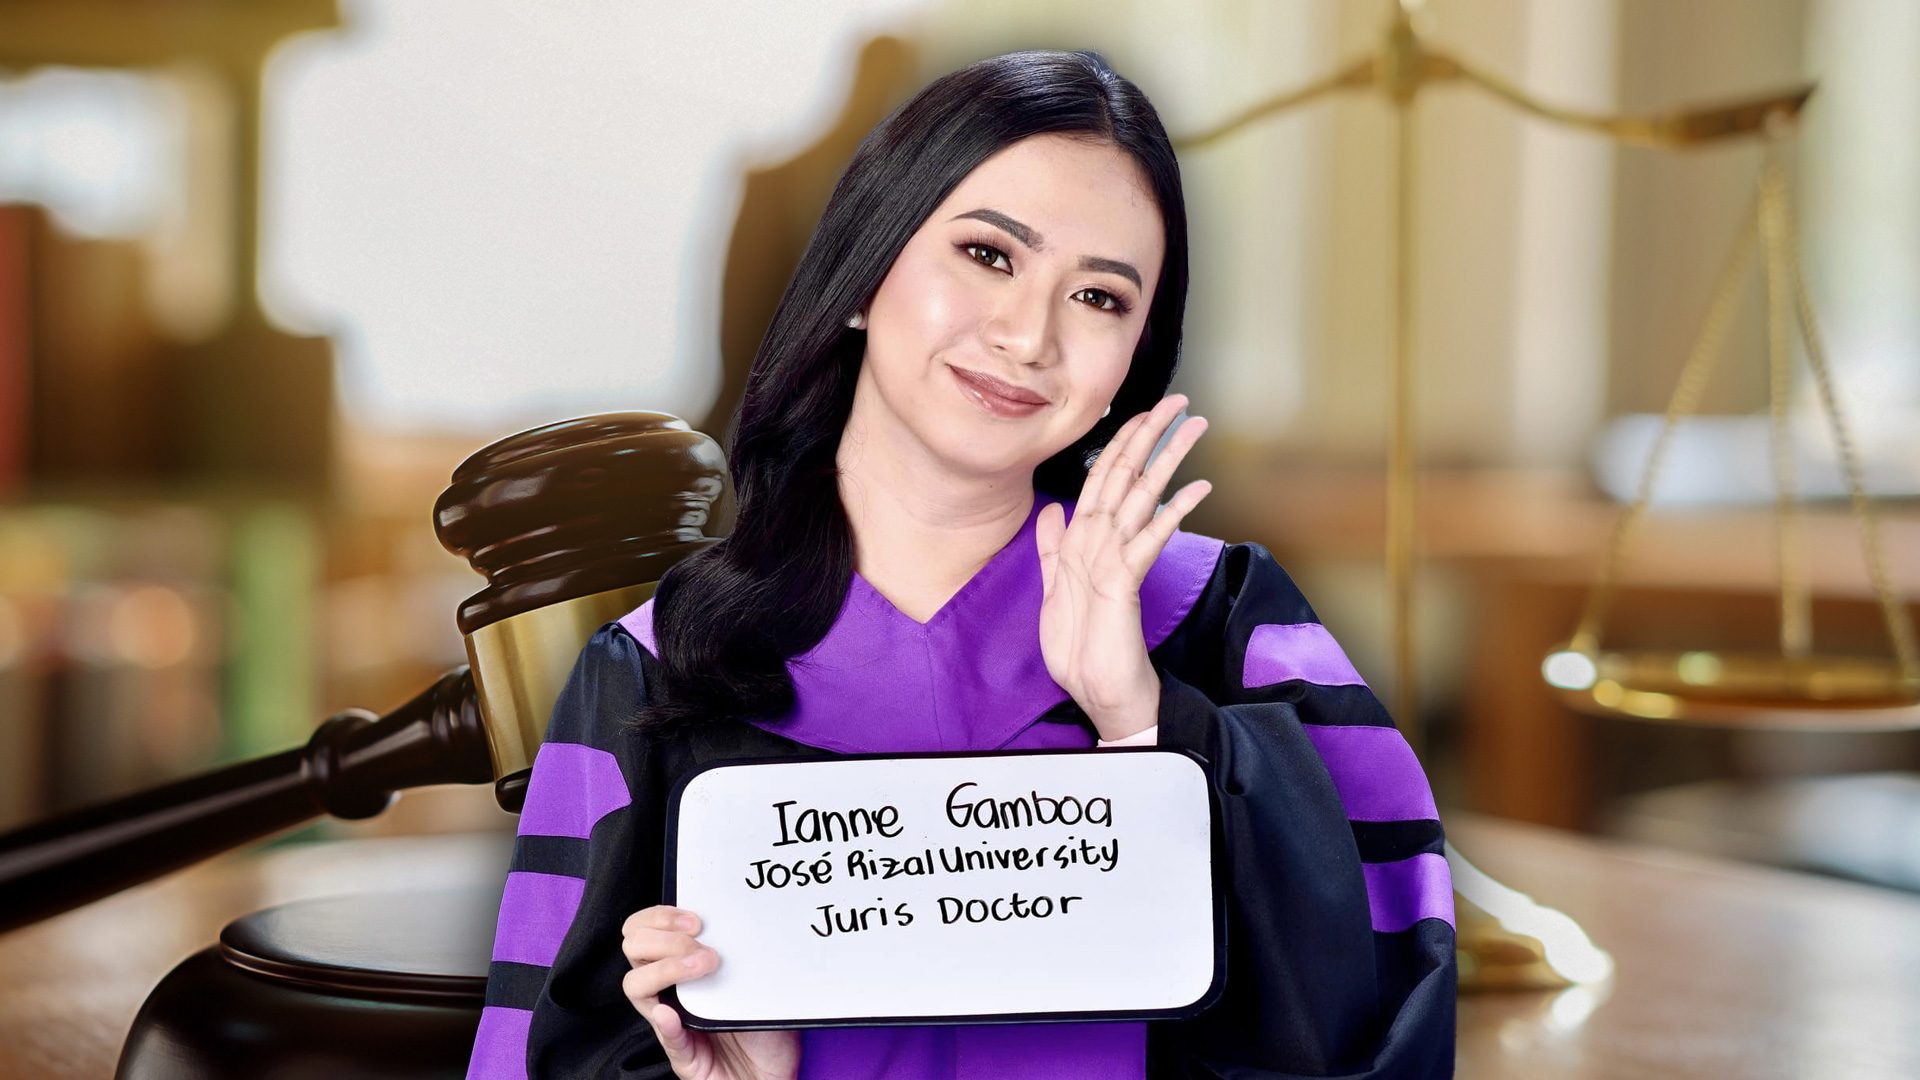 Herstory! PUP’s first trans woman valedictorian is now a lawyer